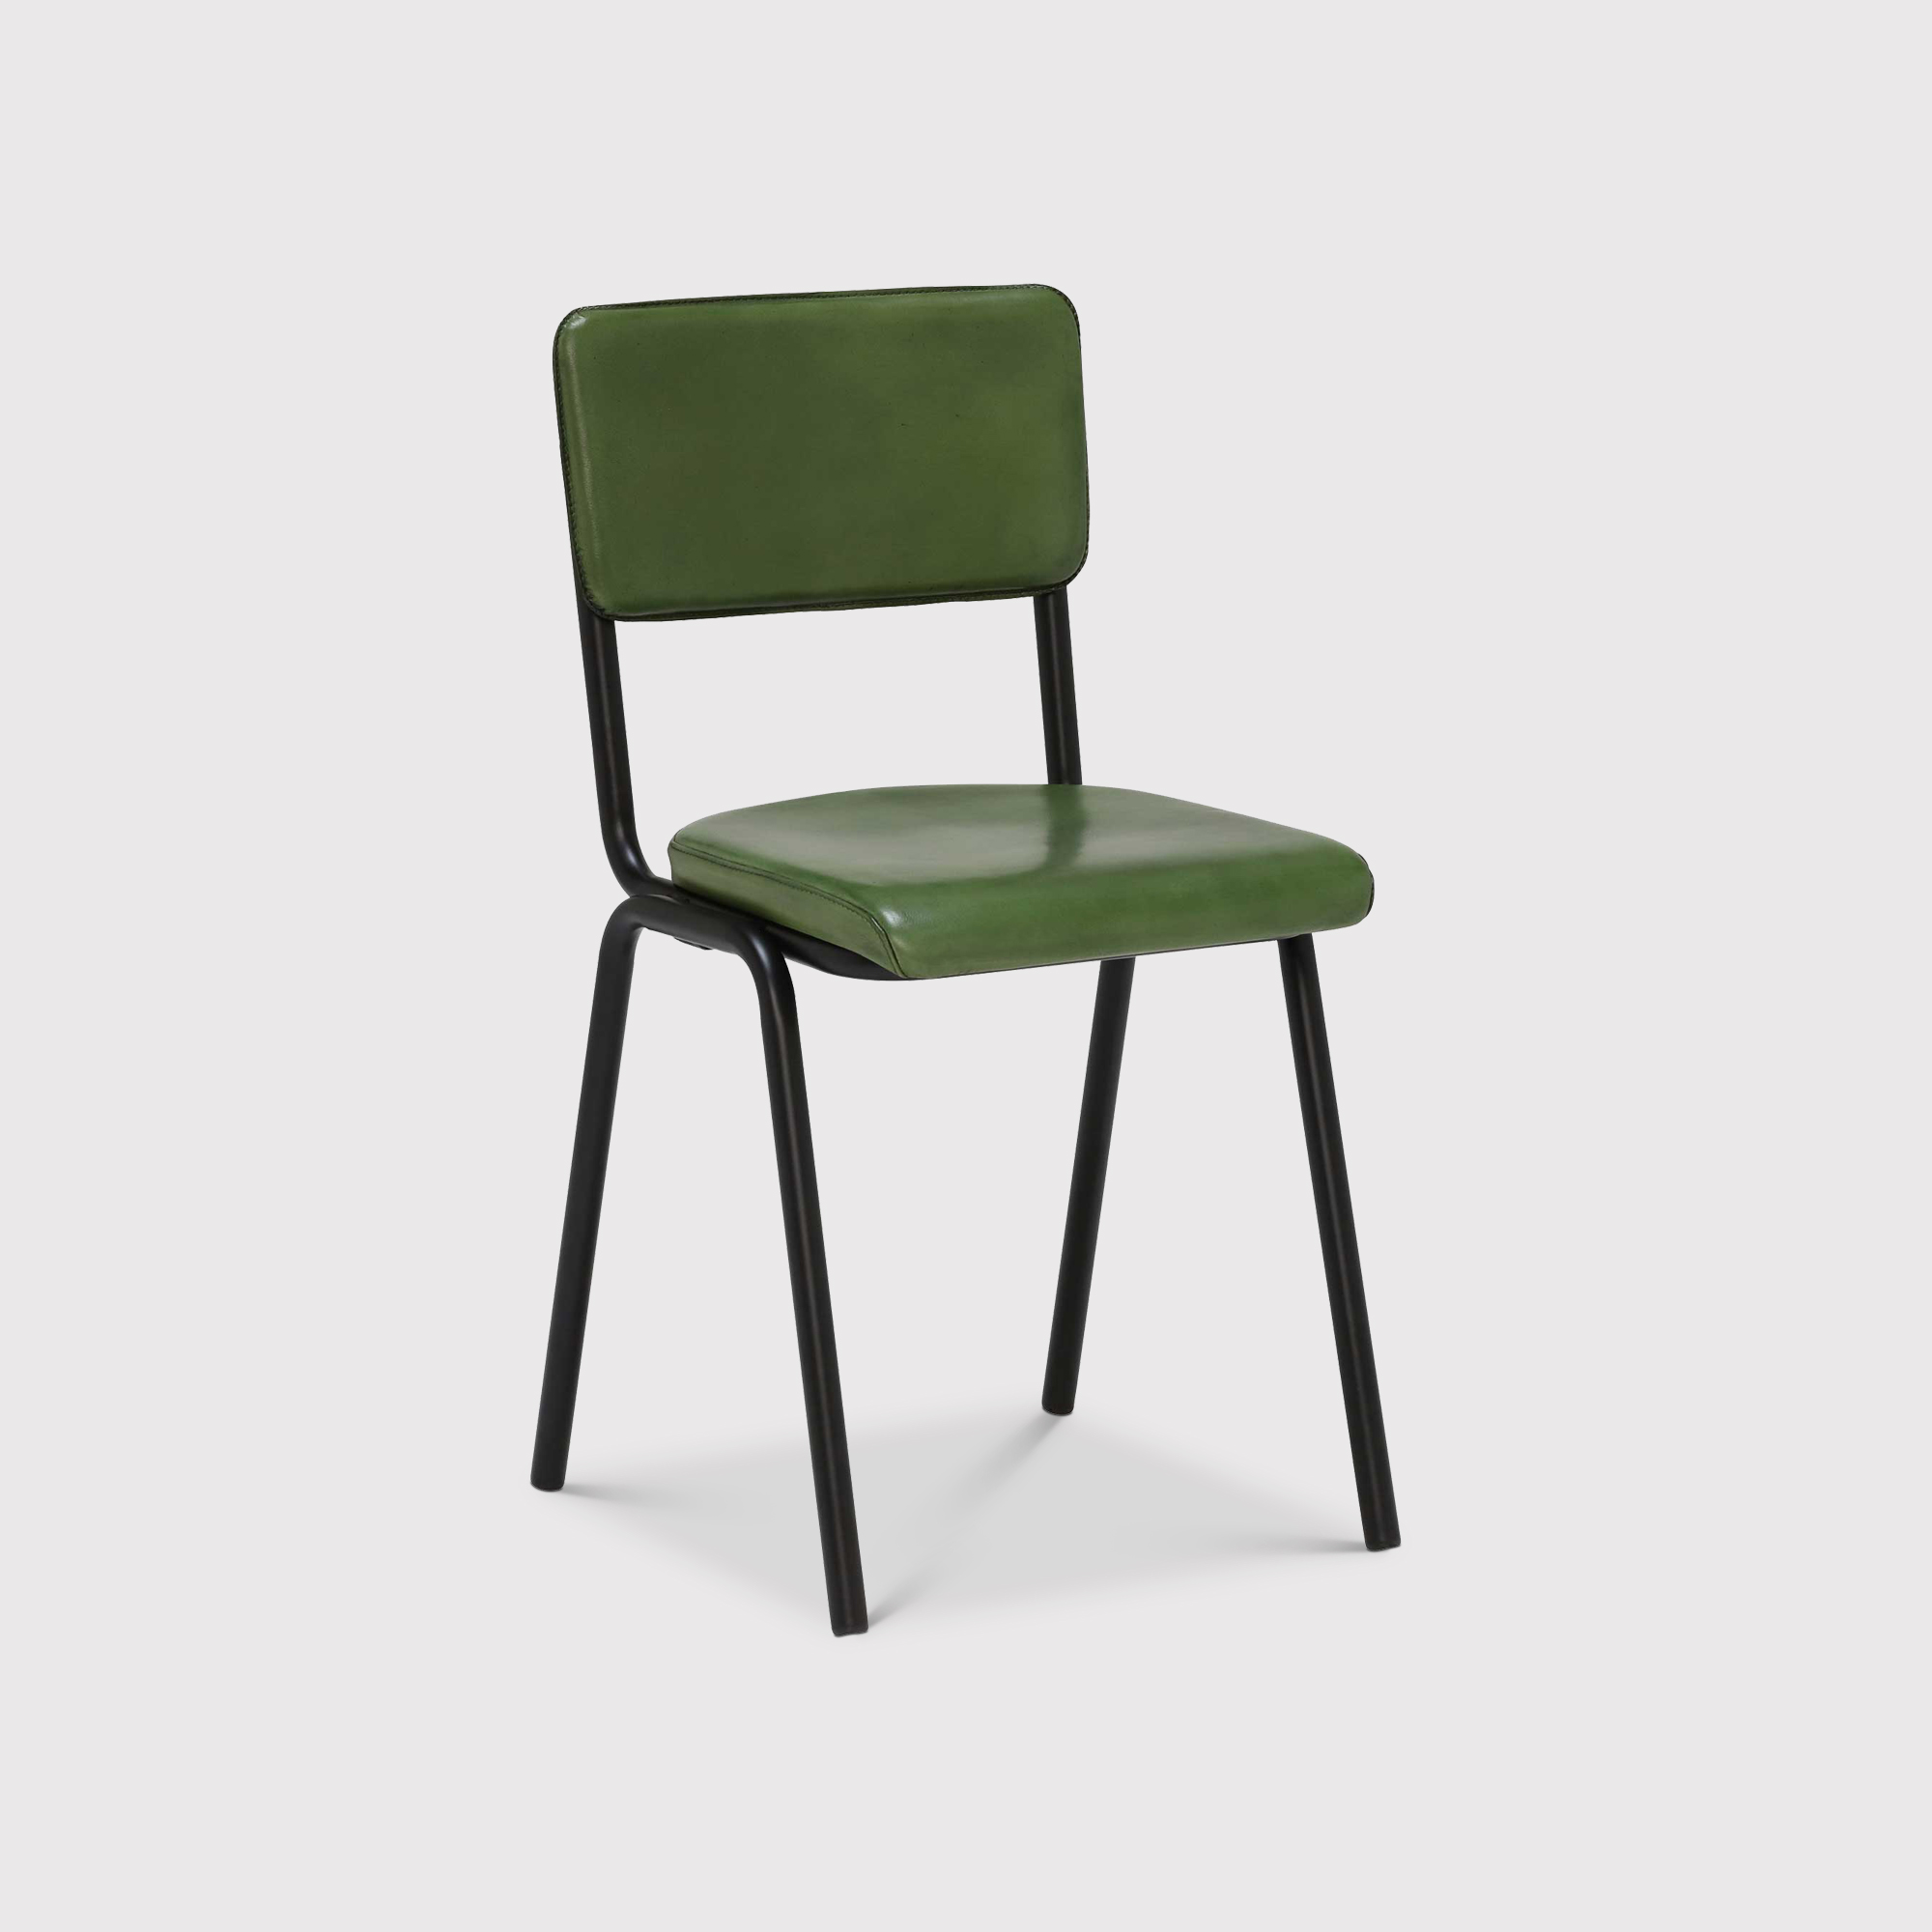 Pure Furniture Twyford Dining Chair, Green | Barker & Stonehouse